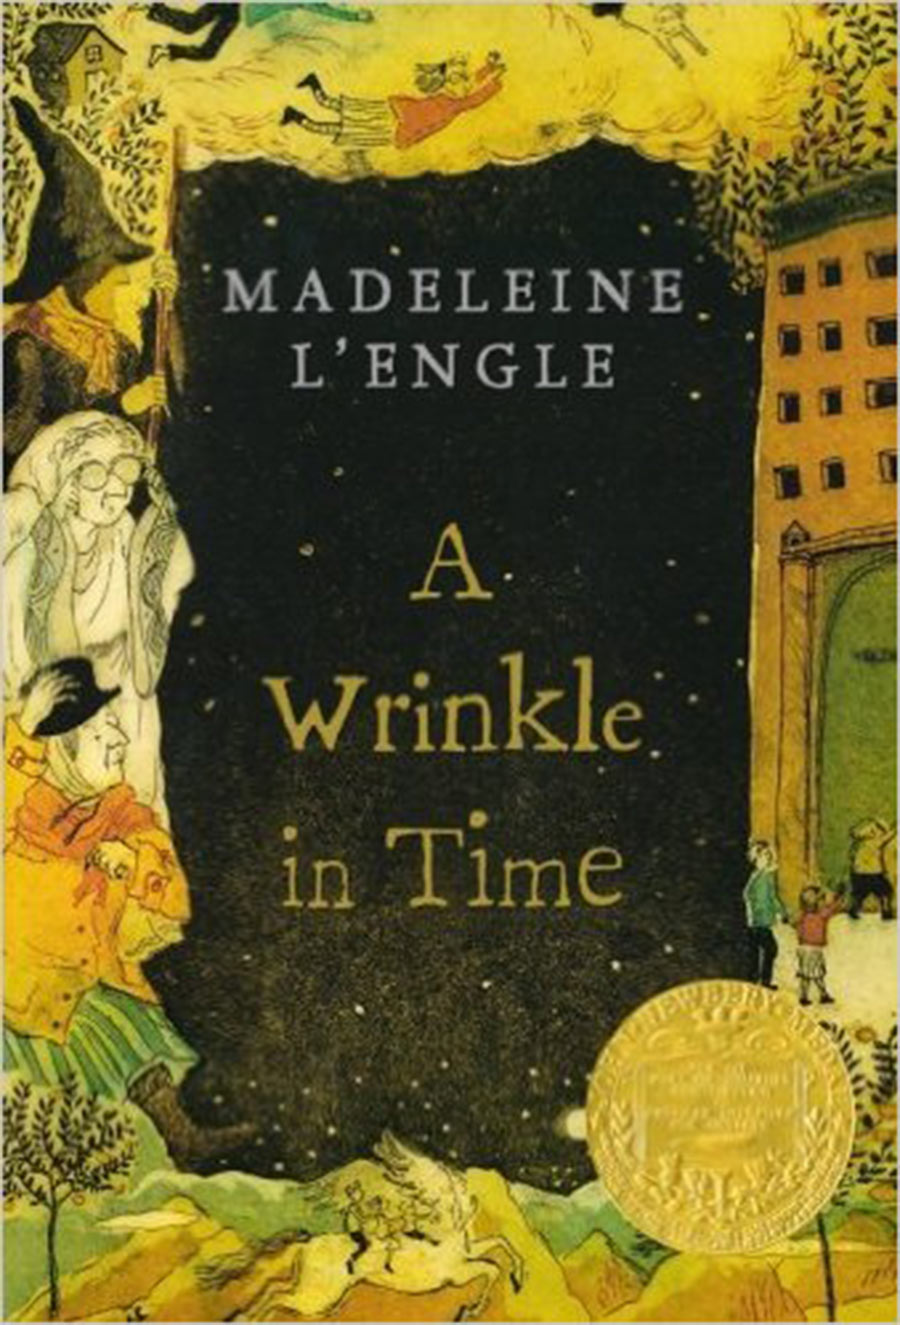 A WRINKLE IN TIME BY MADELEINE L ENGLE